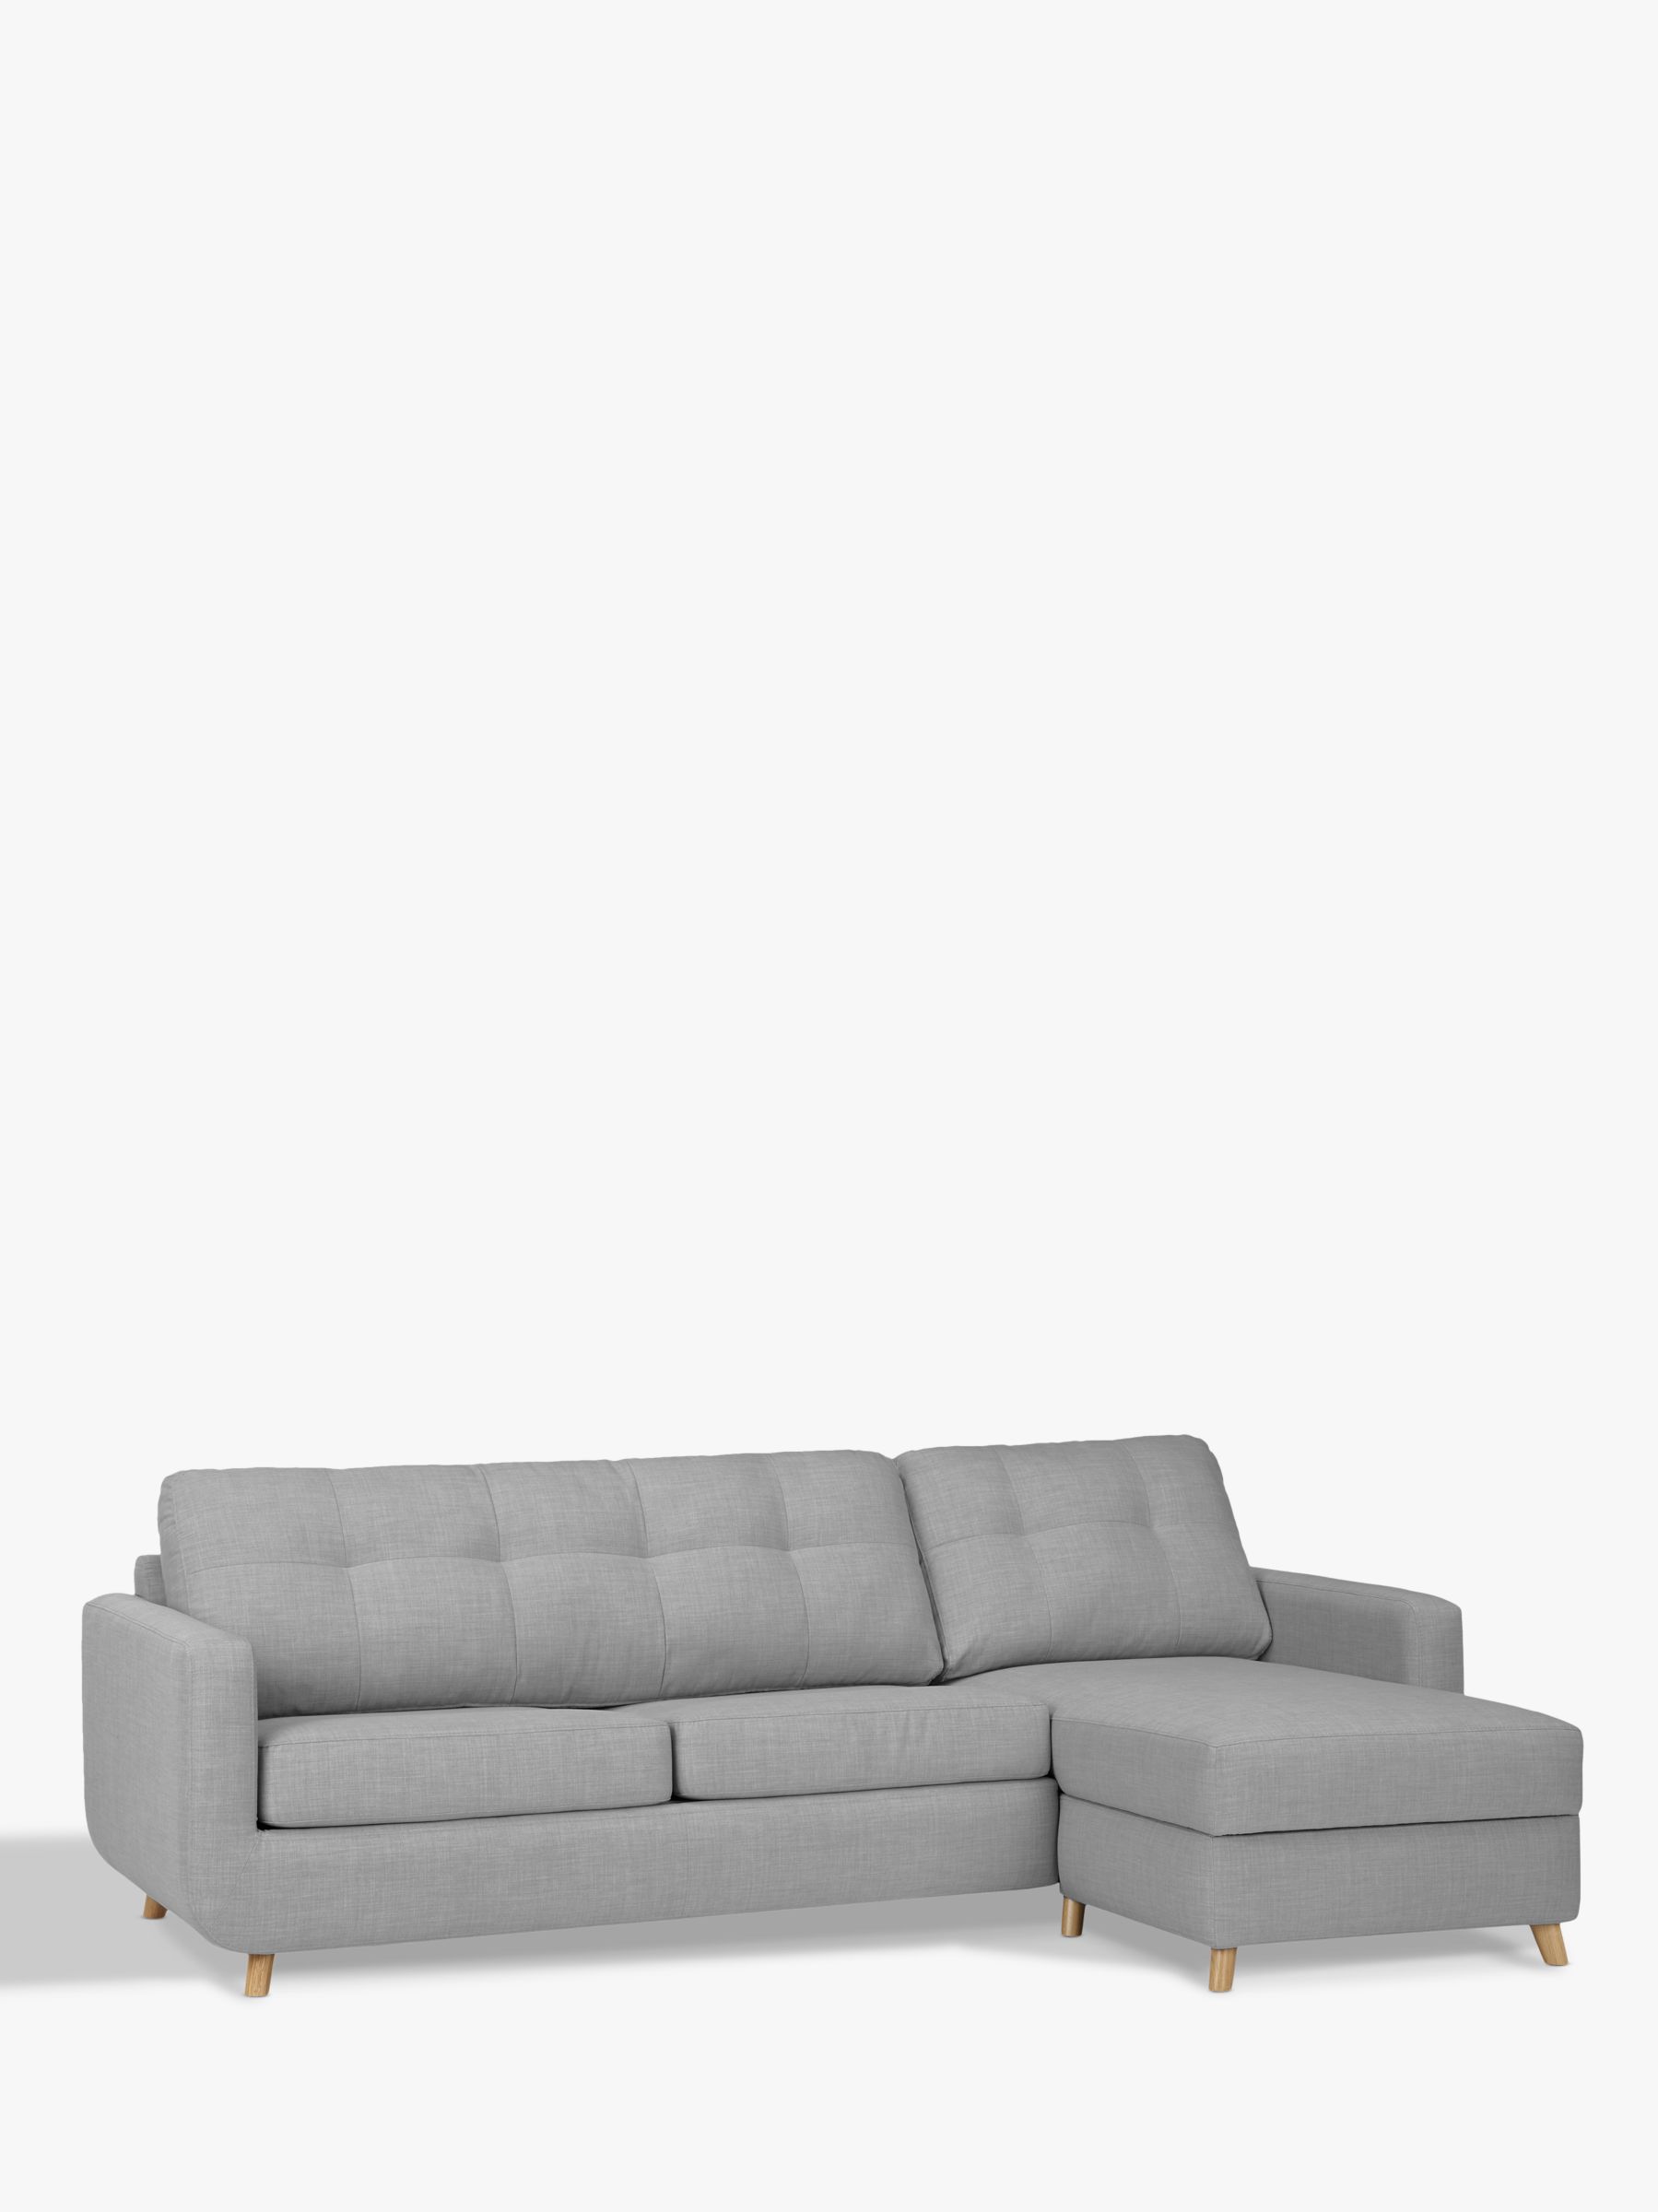 Photo of John lewis barbican rhf chaise sofa bed with storage